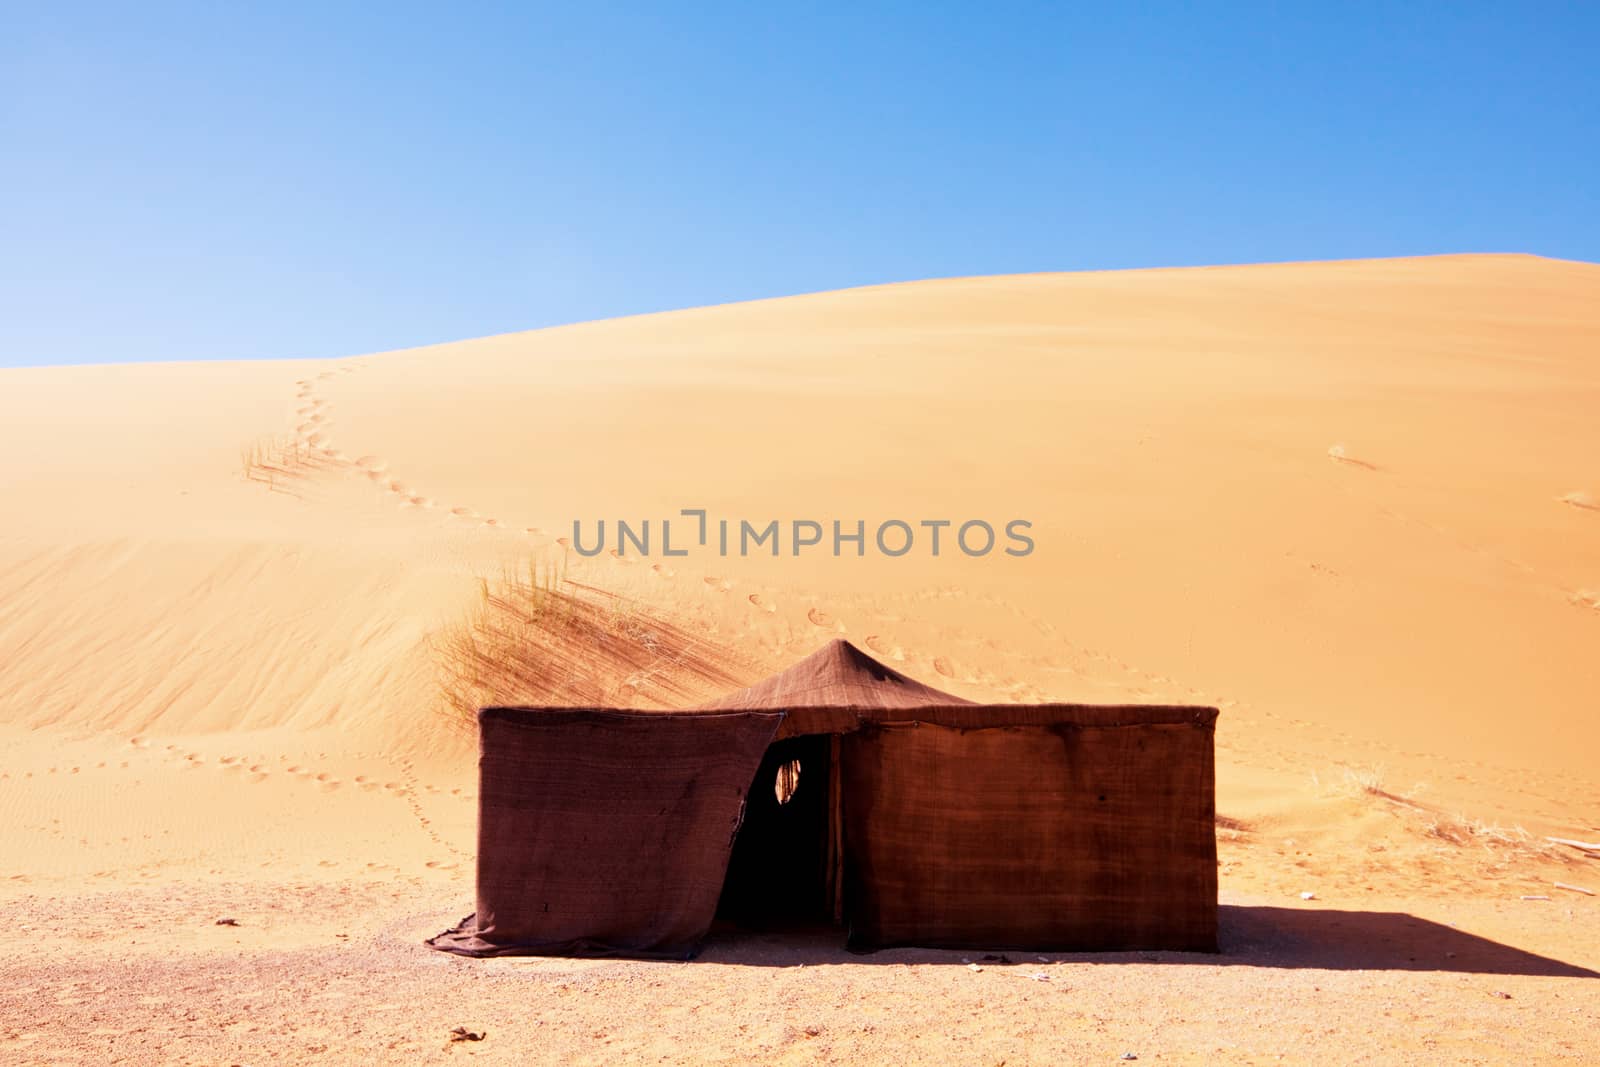 Camp in the desert by kamchatka